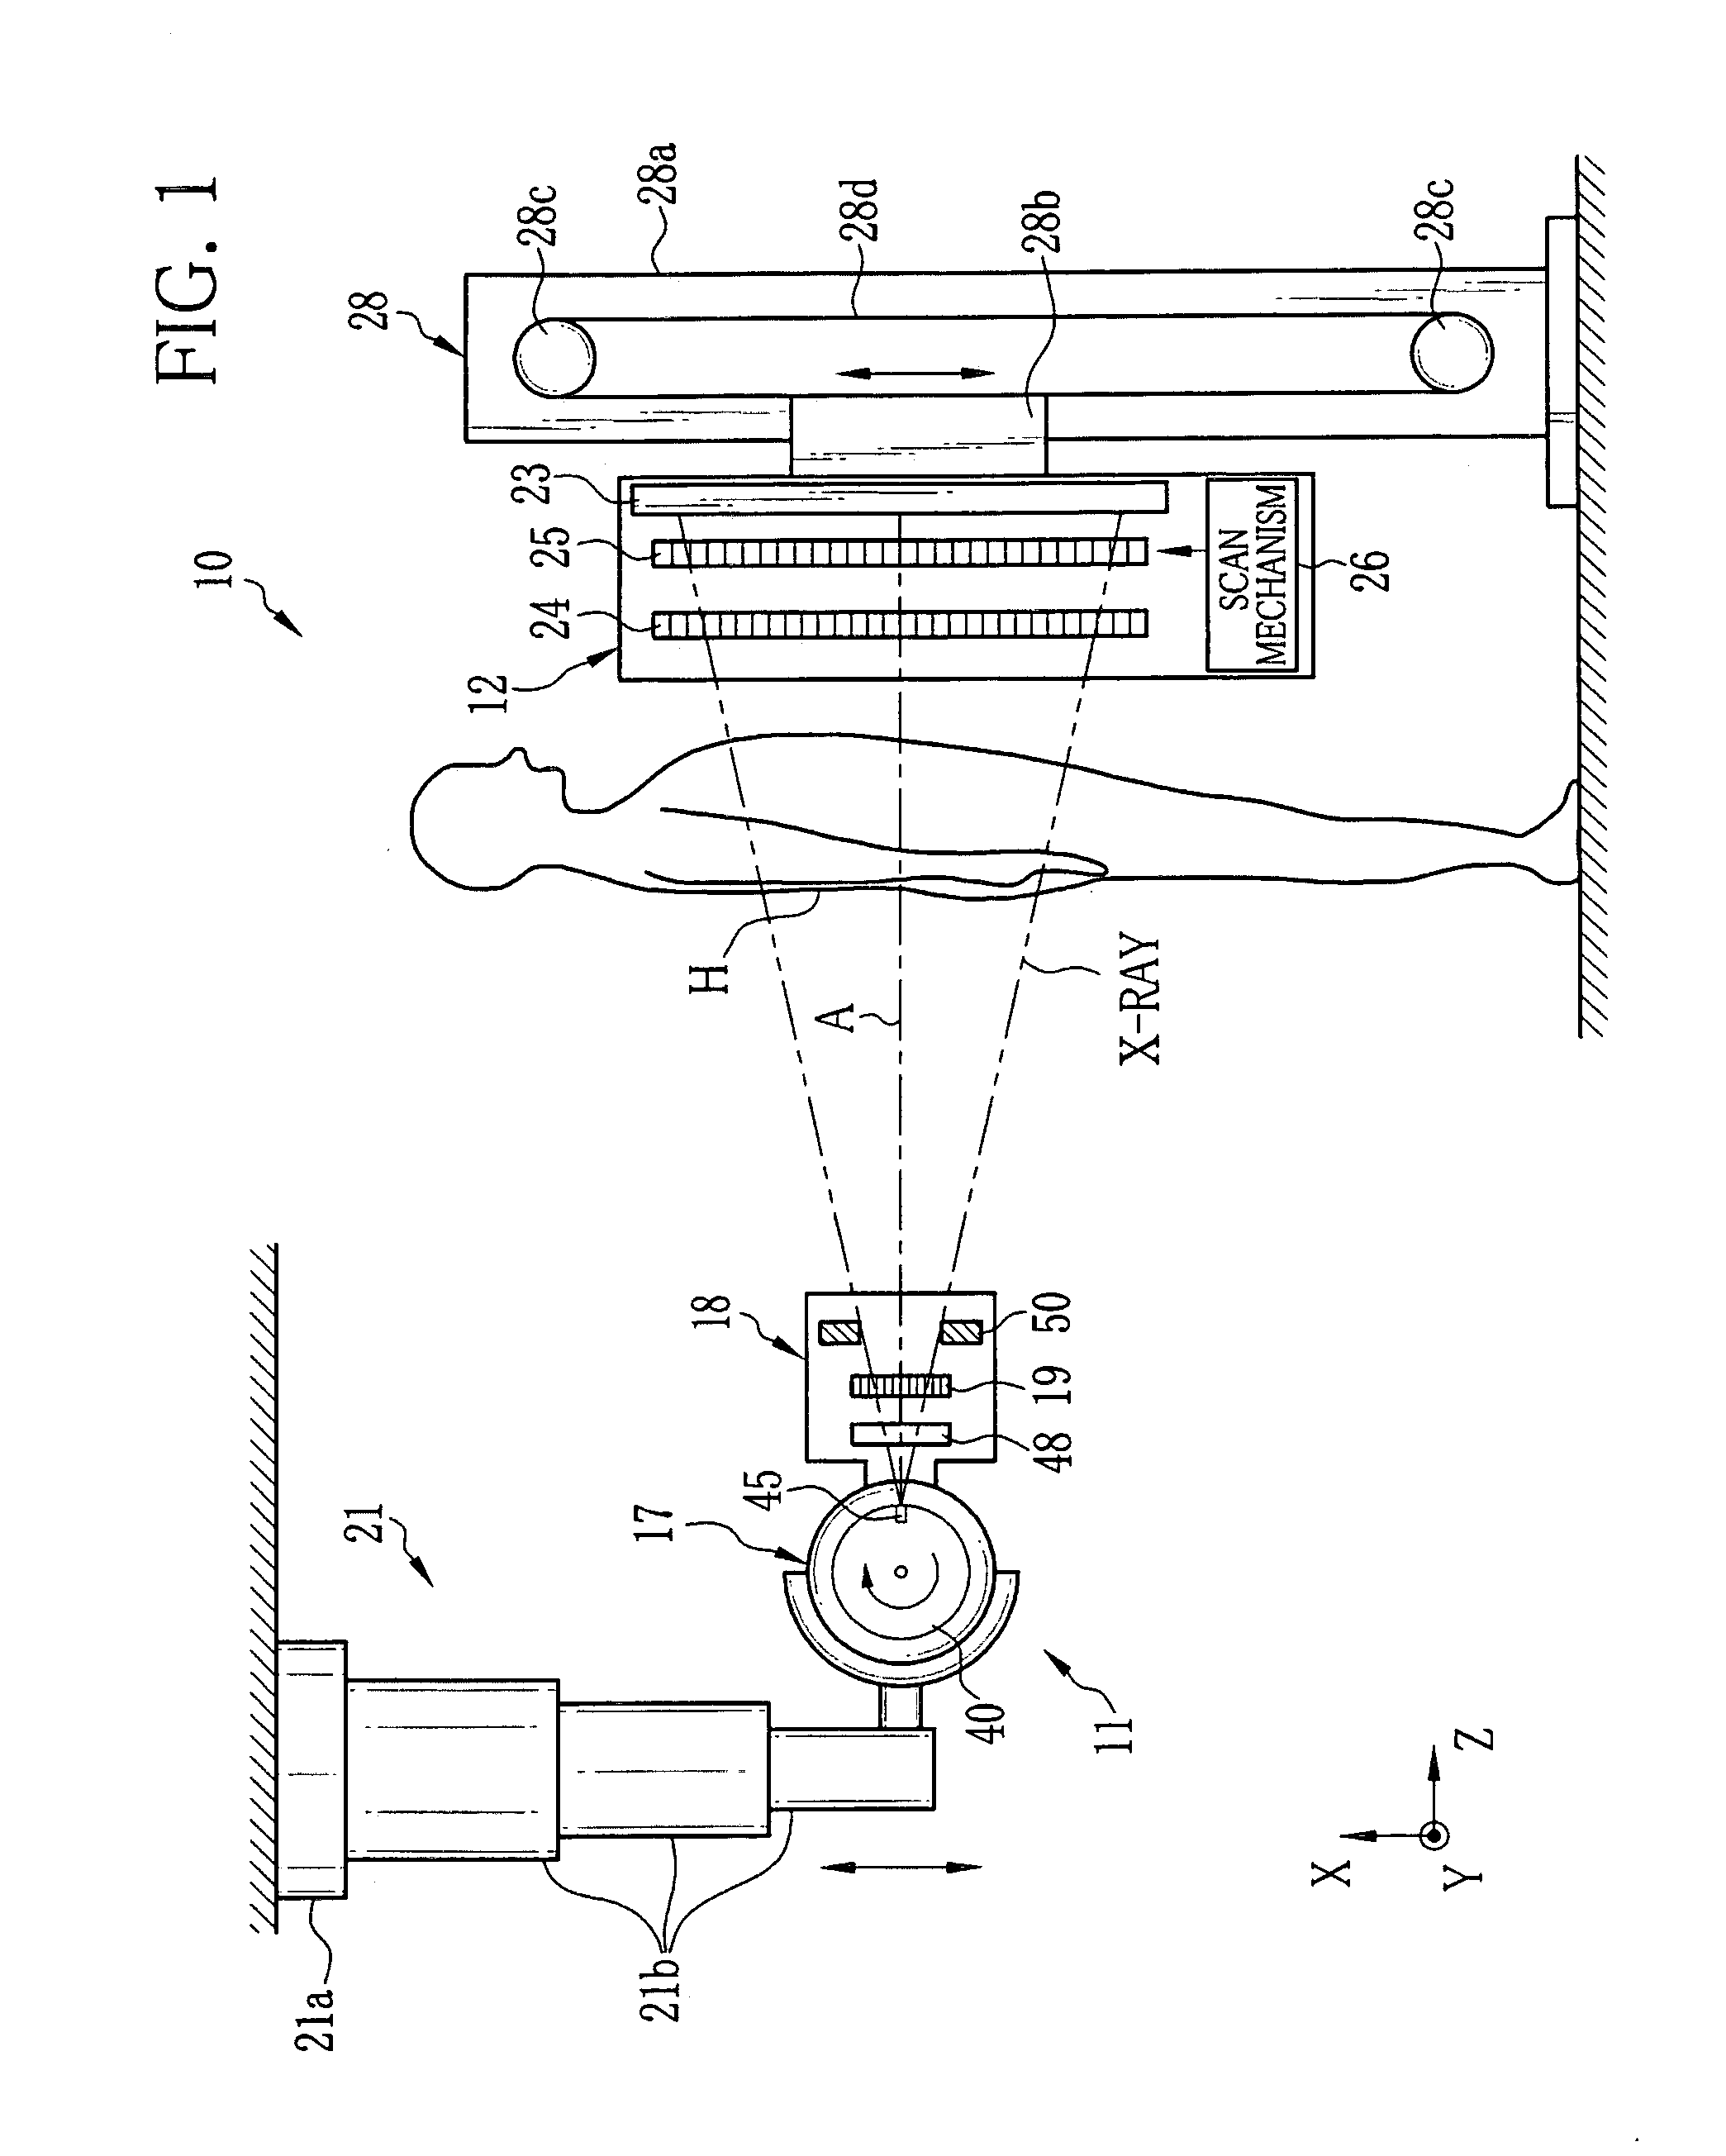 Radiation imaging system and collimator unit